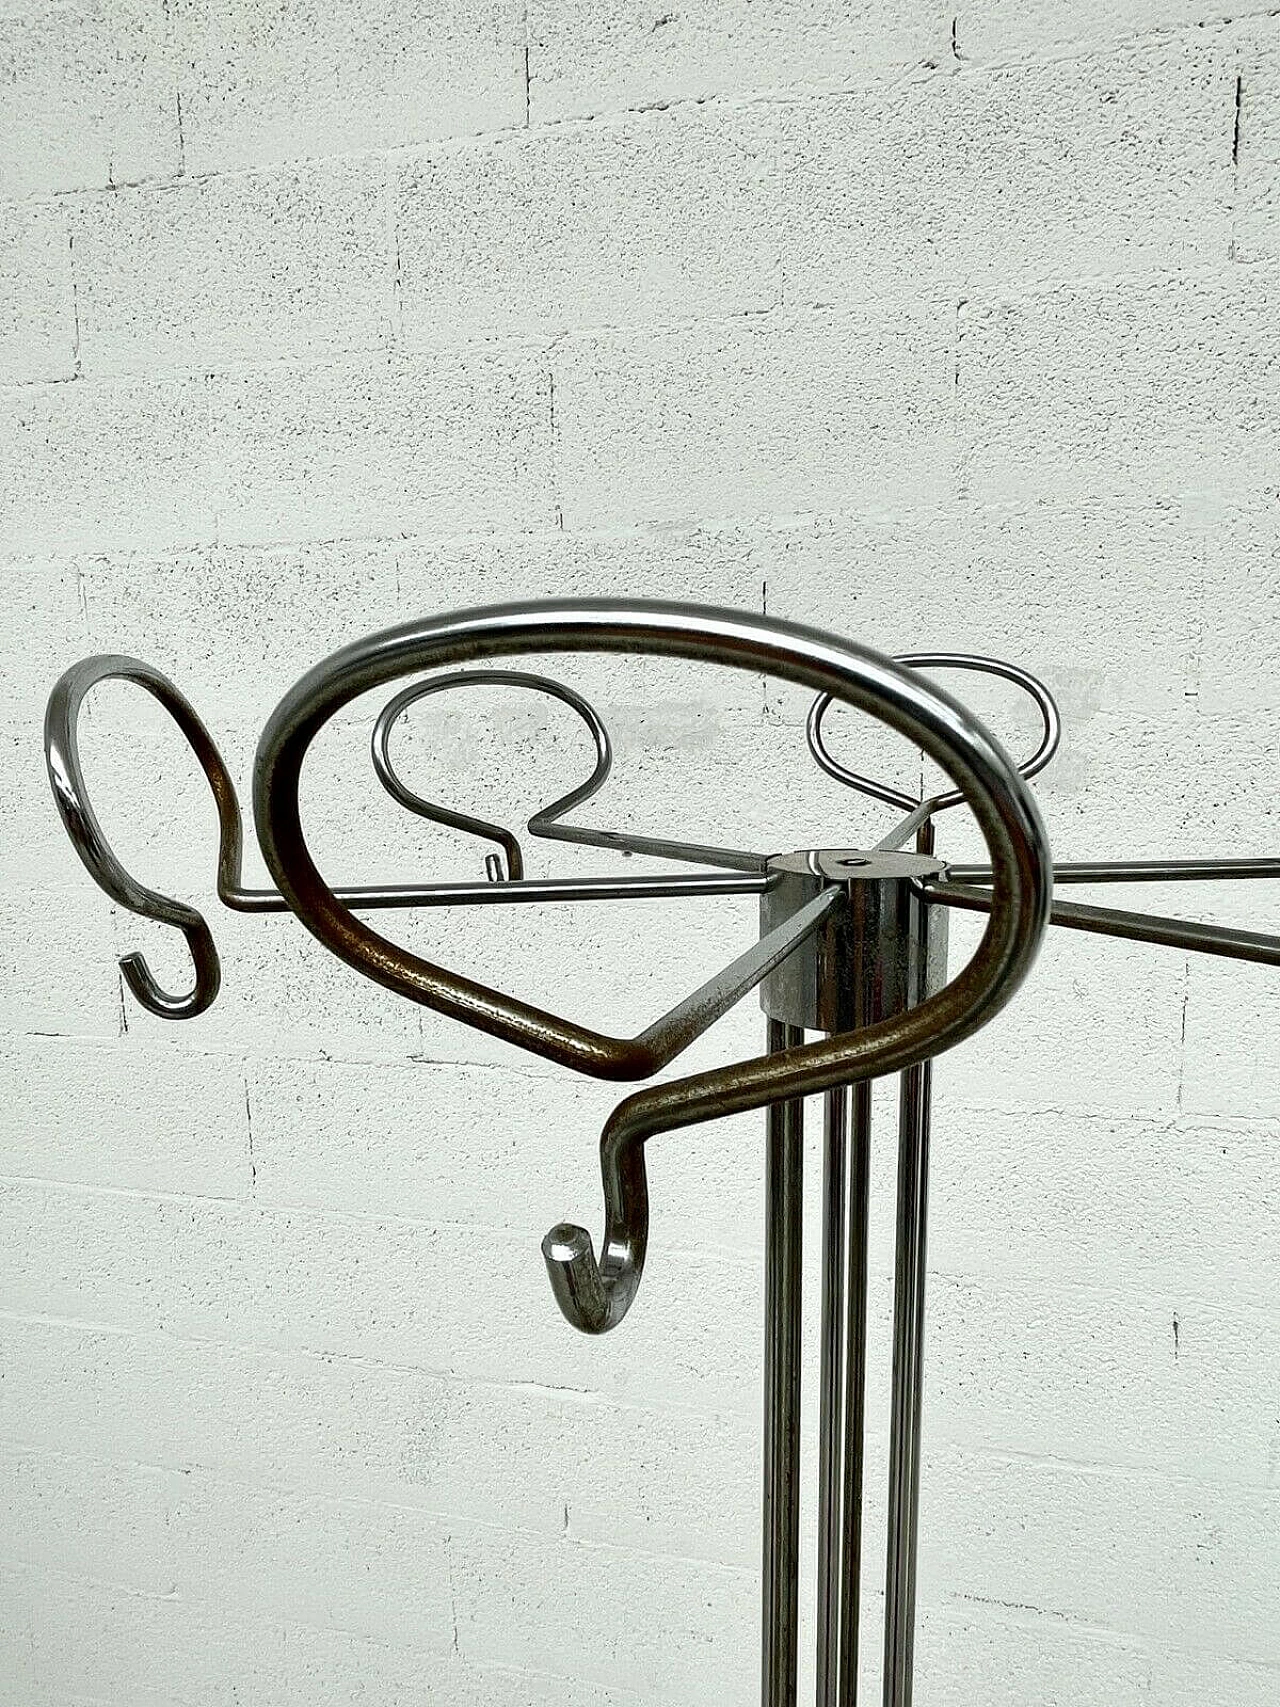 Chromed coat stand by Isao Hosoe for Valenti Luce, 70s 1280334